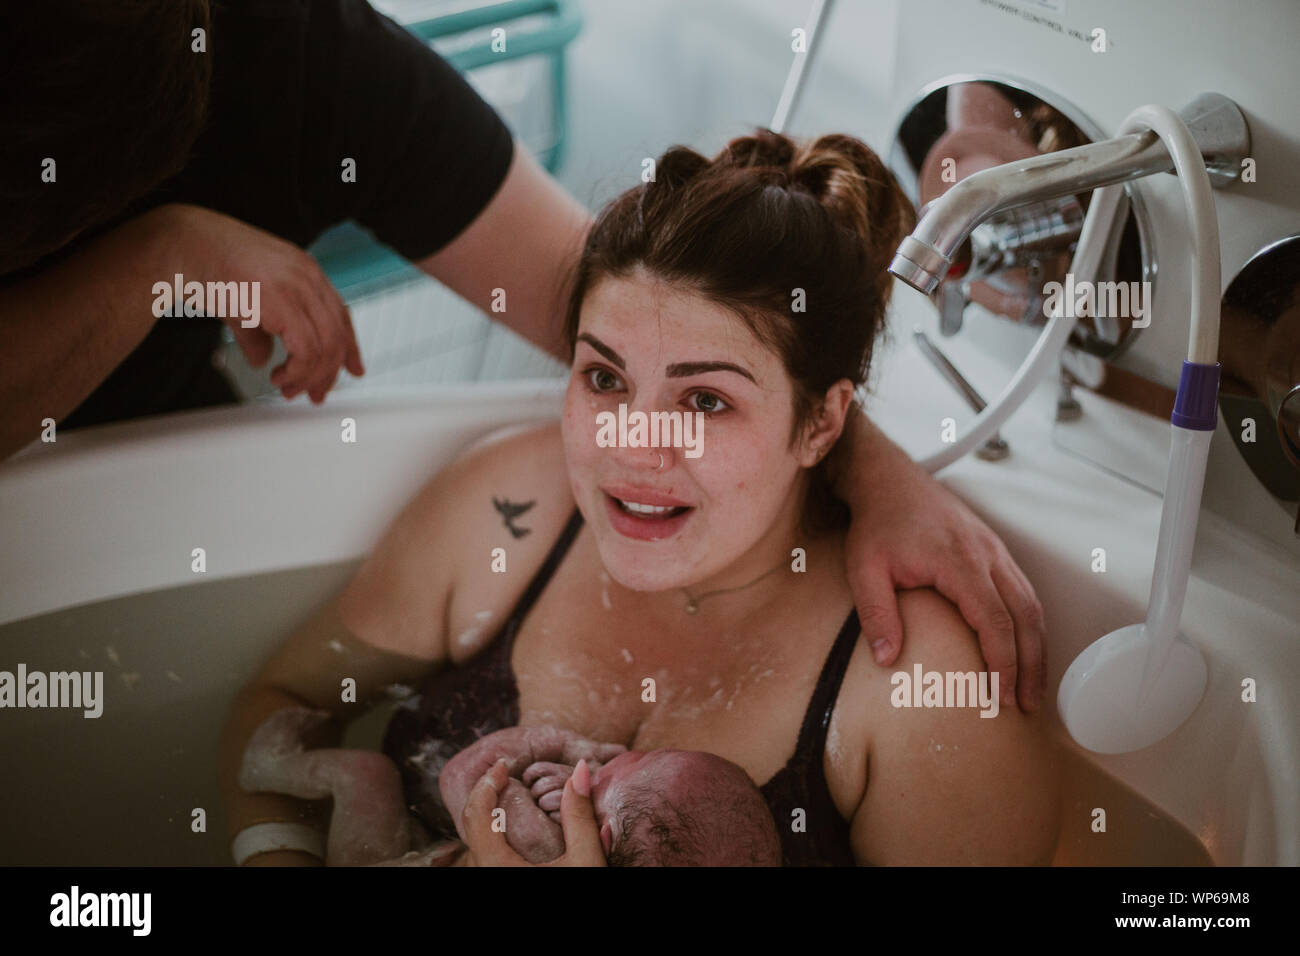 Authentic birth images, woman giving birth in pool Stock Photo